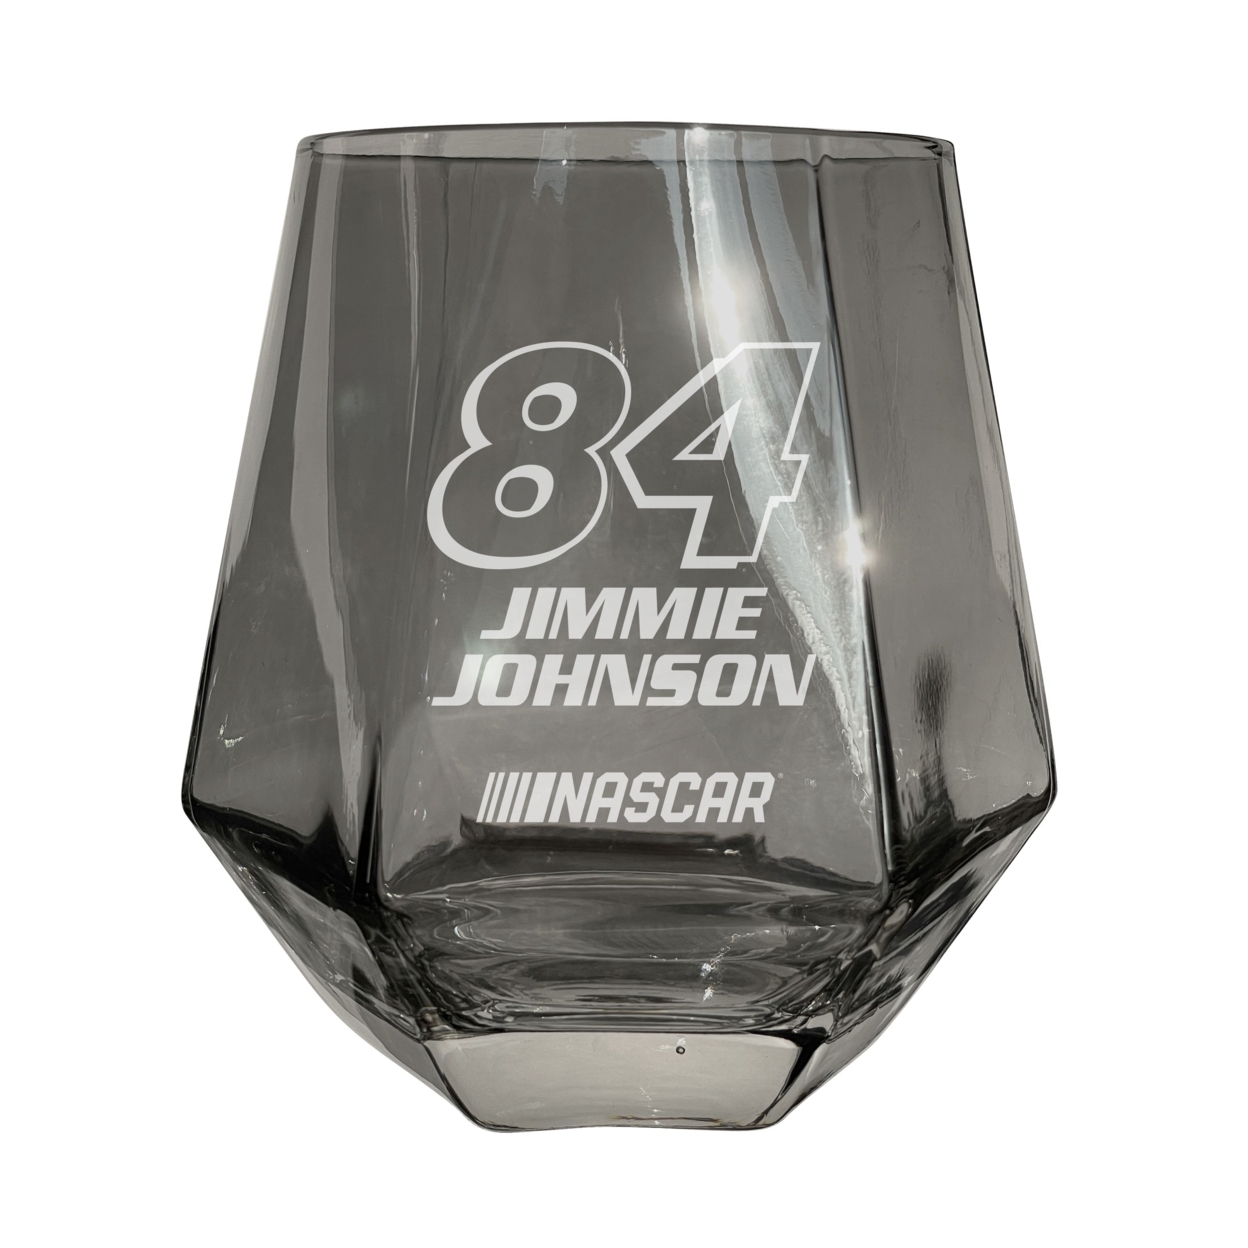 #84 Jimmie Johnson Officially Licensed 10 Oz Engraved Diamond Wine Glass - Iridescent, Single